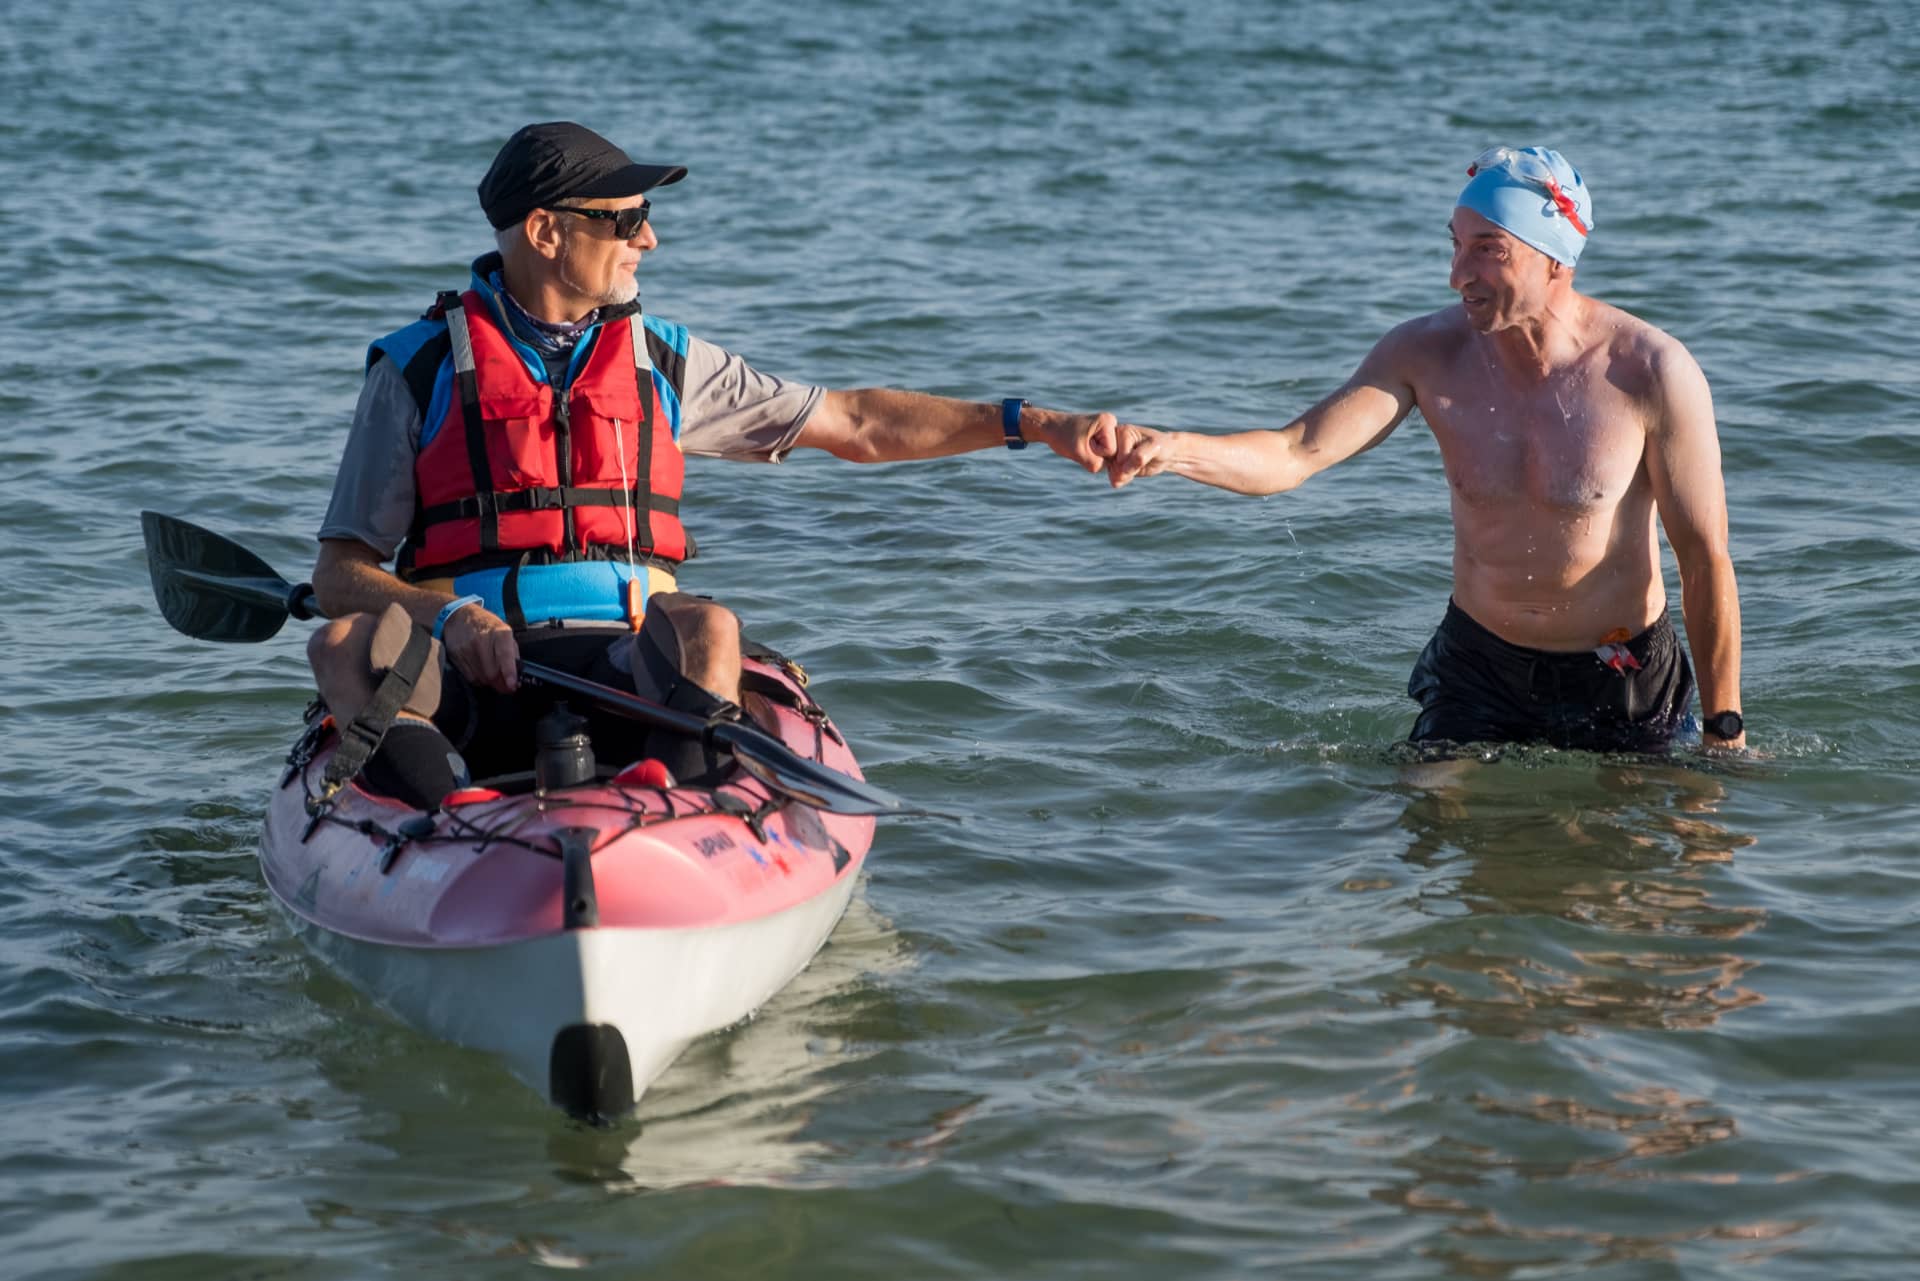 Swimmer Phillip Instone with Kayaker Martin Scotcher by Michael Dangerfield